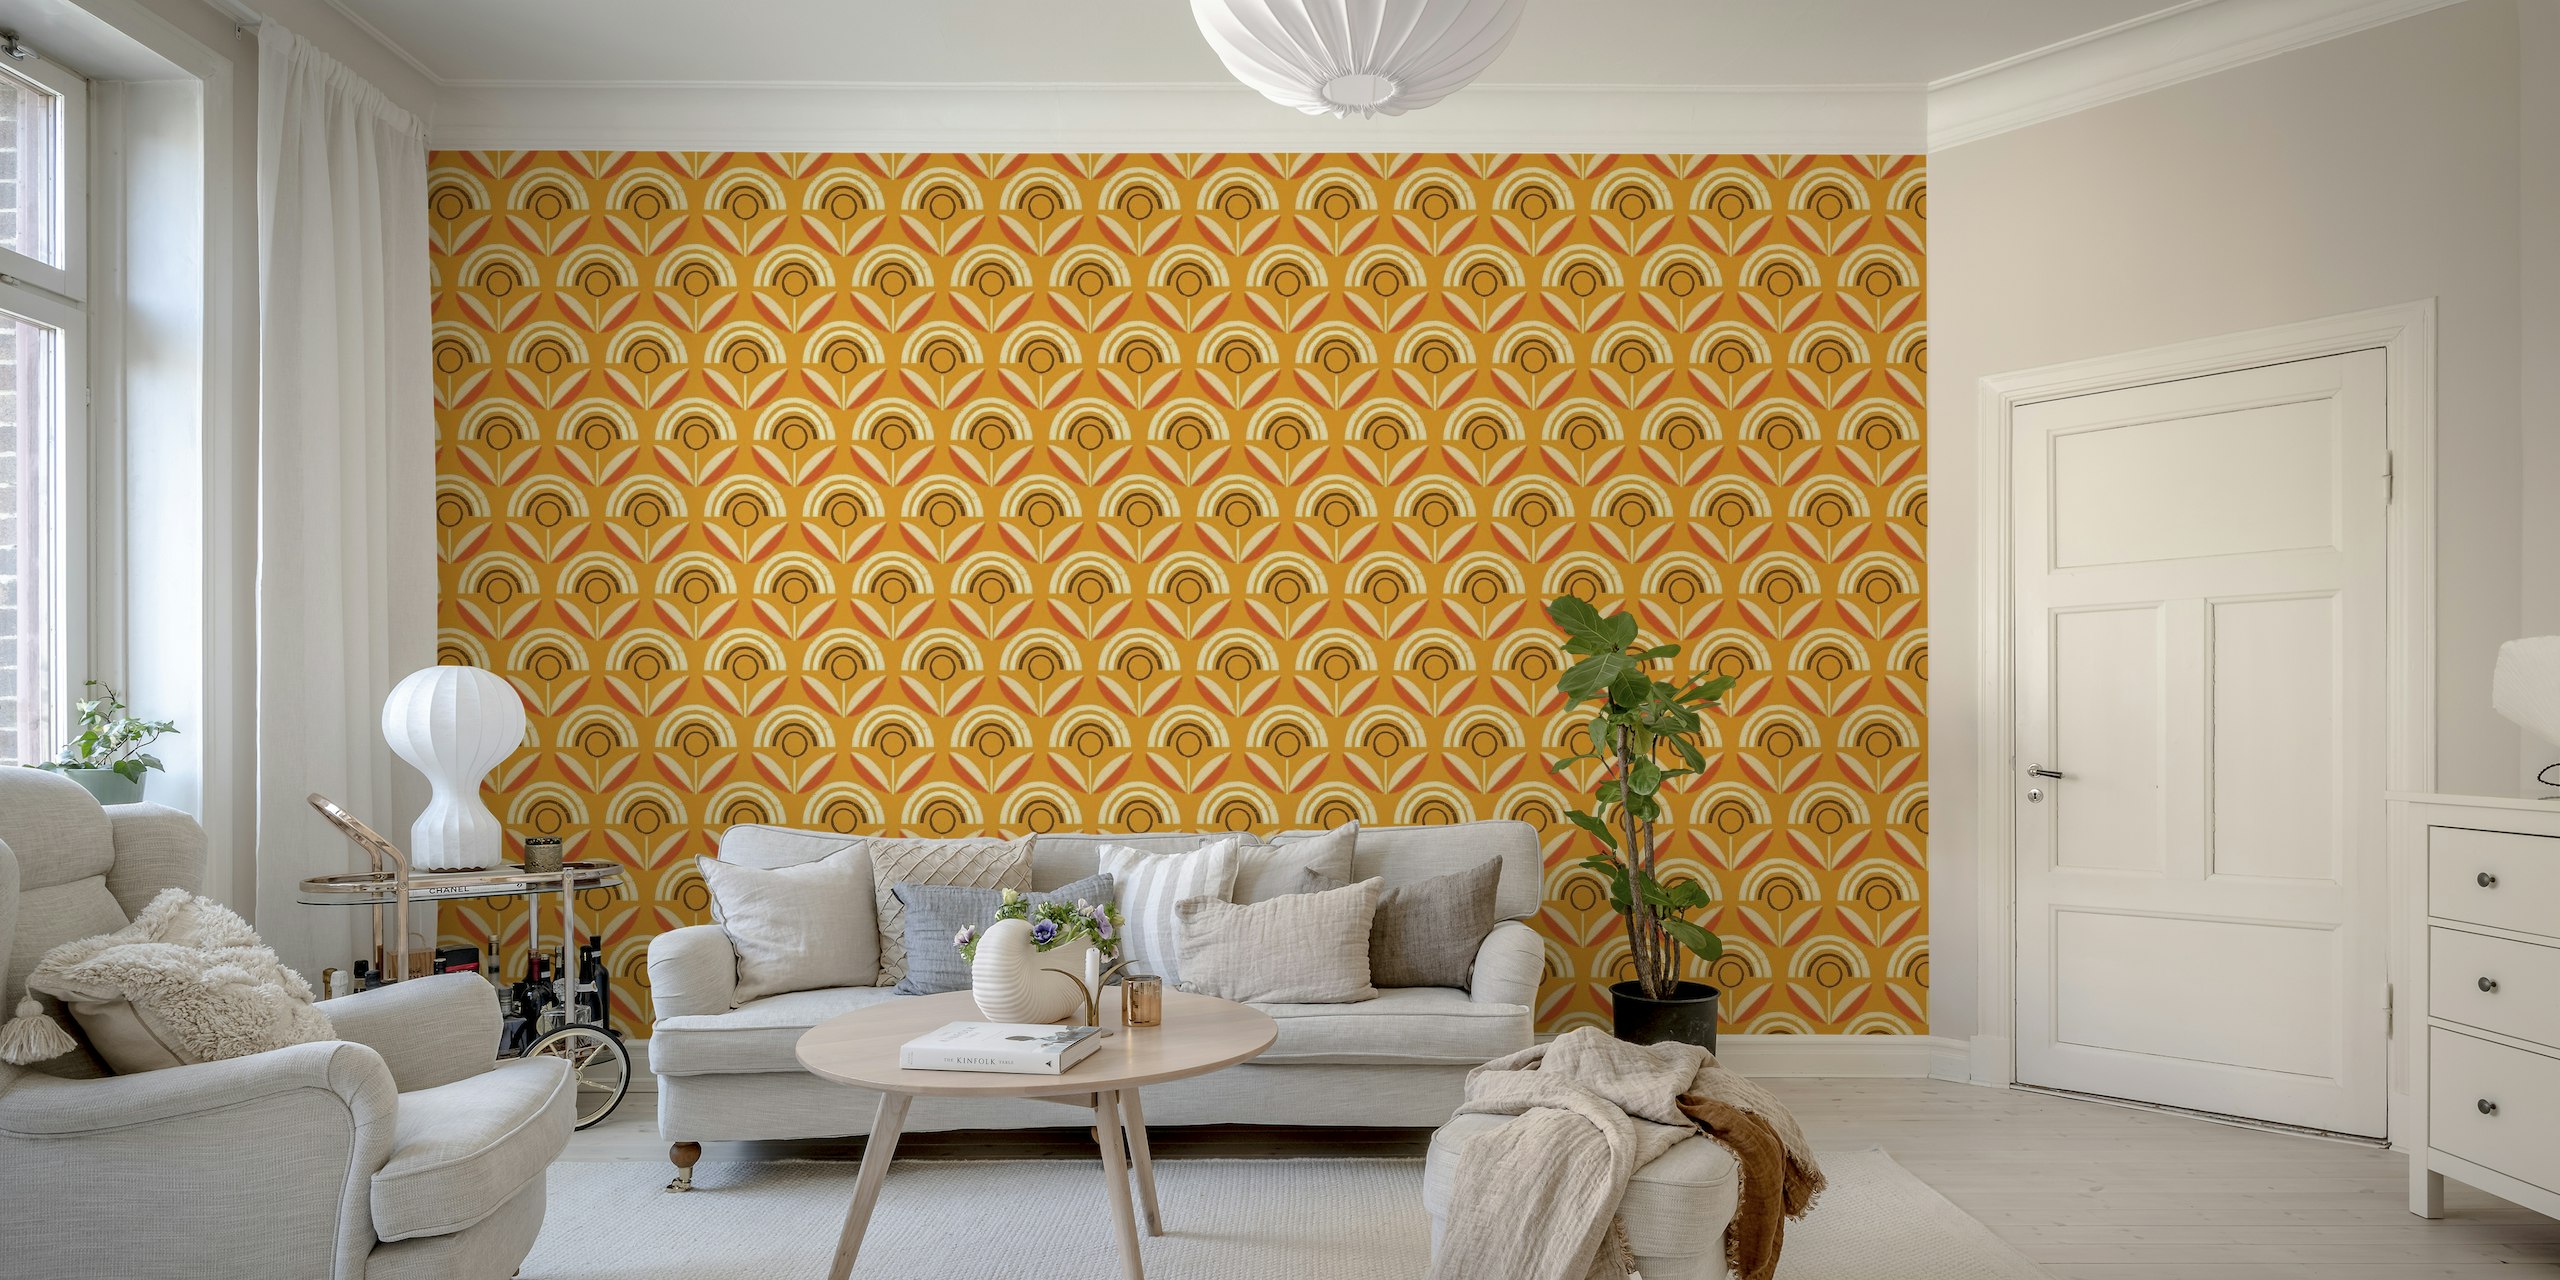 Stylized mid-century sunflower design in marigold and brown tones wall mural